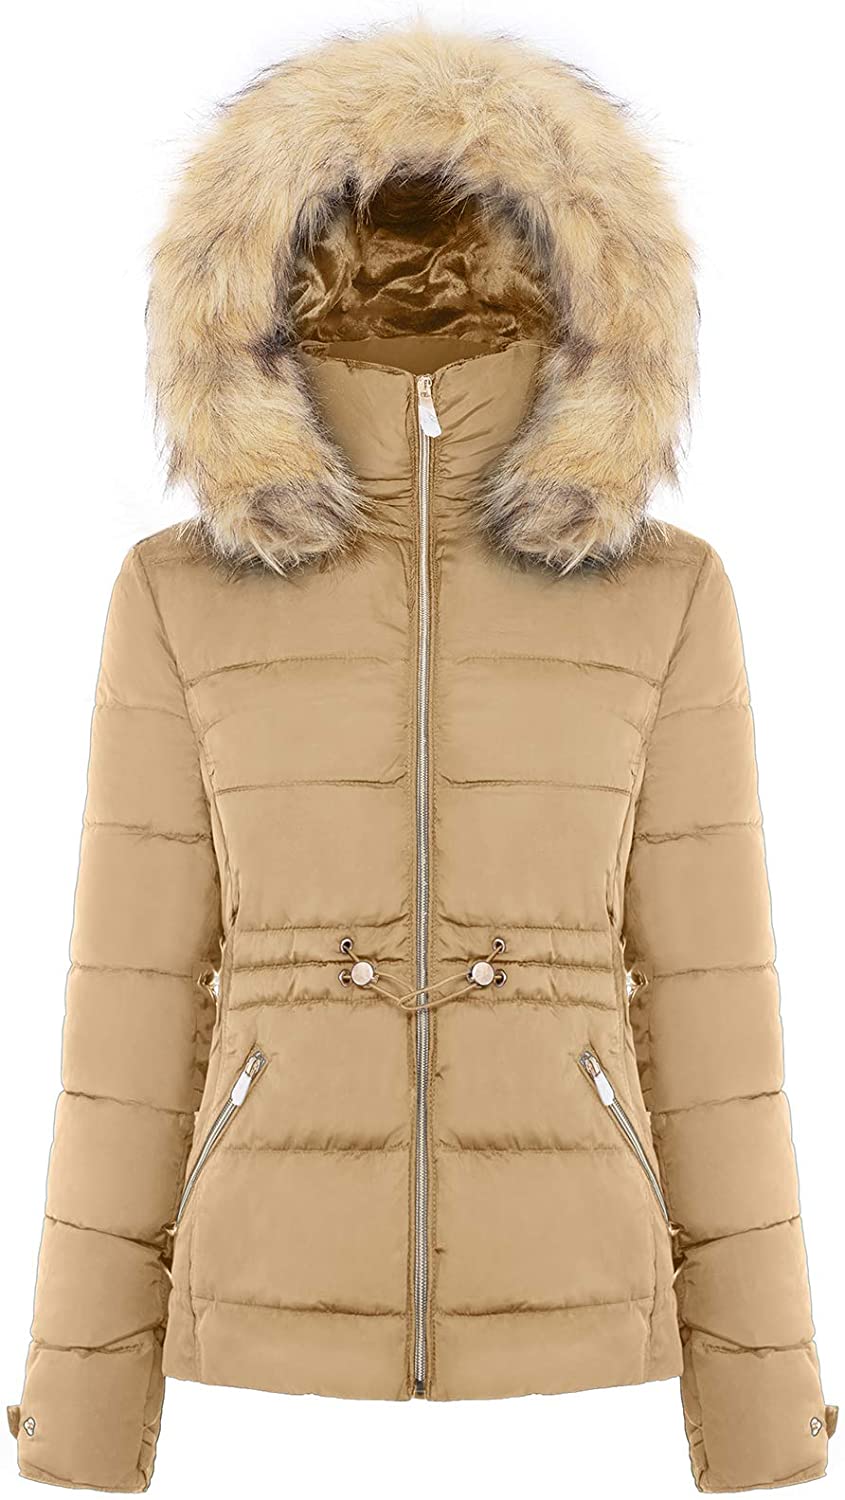 BodiLove Women's Winter Quilted Puffer Short Coat Jacket with Removable Faux  Fur | eBay